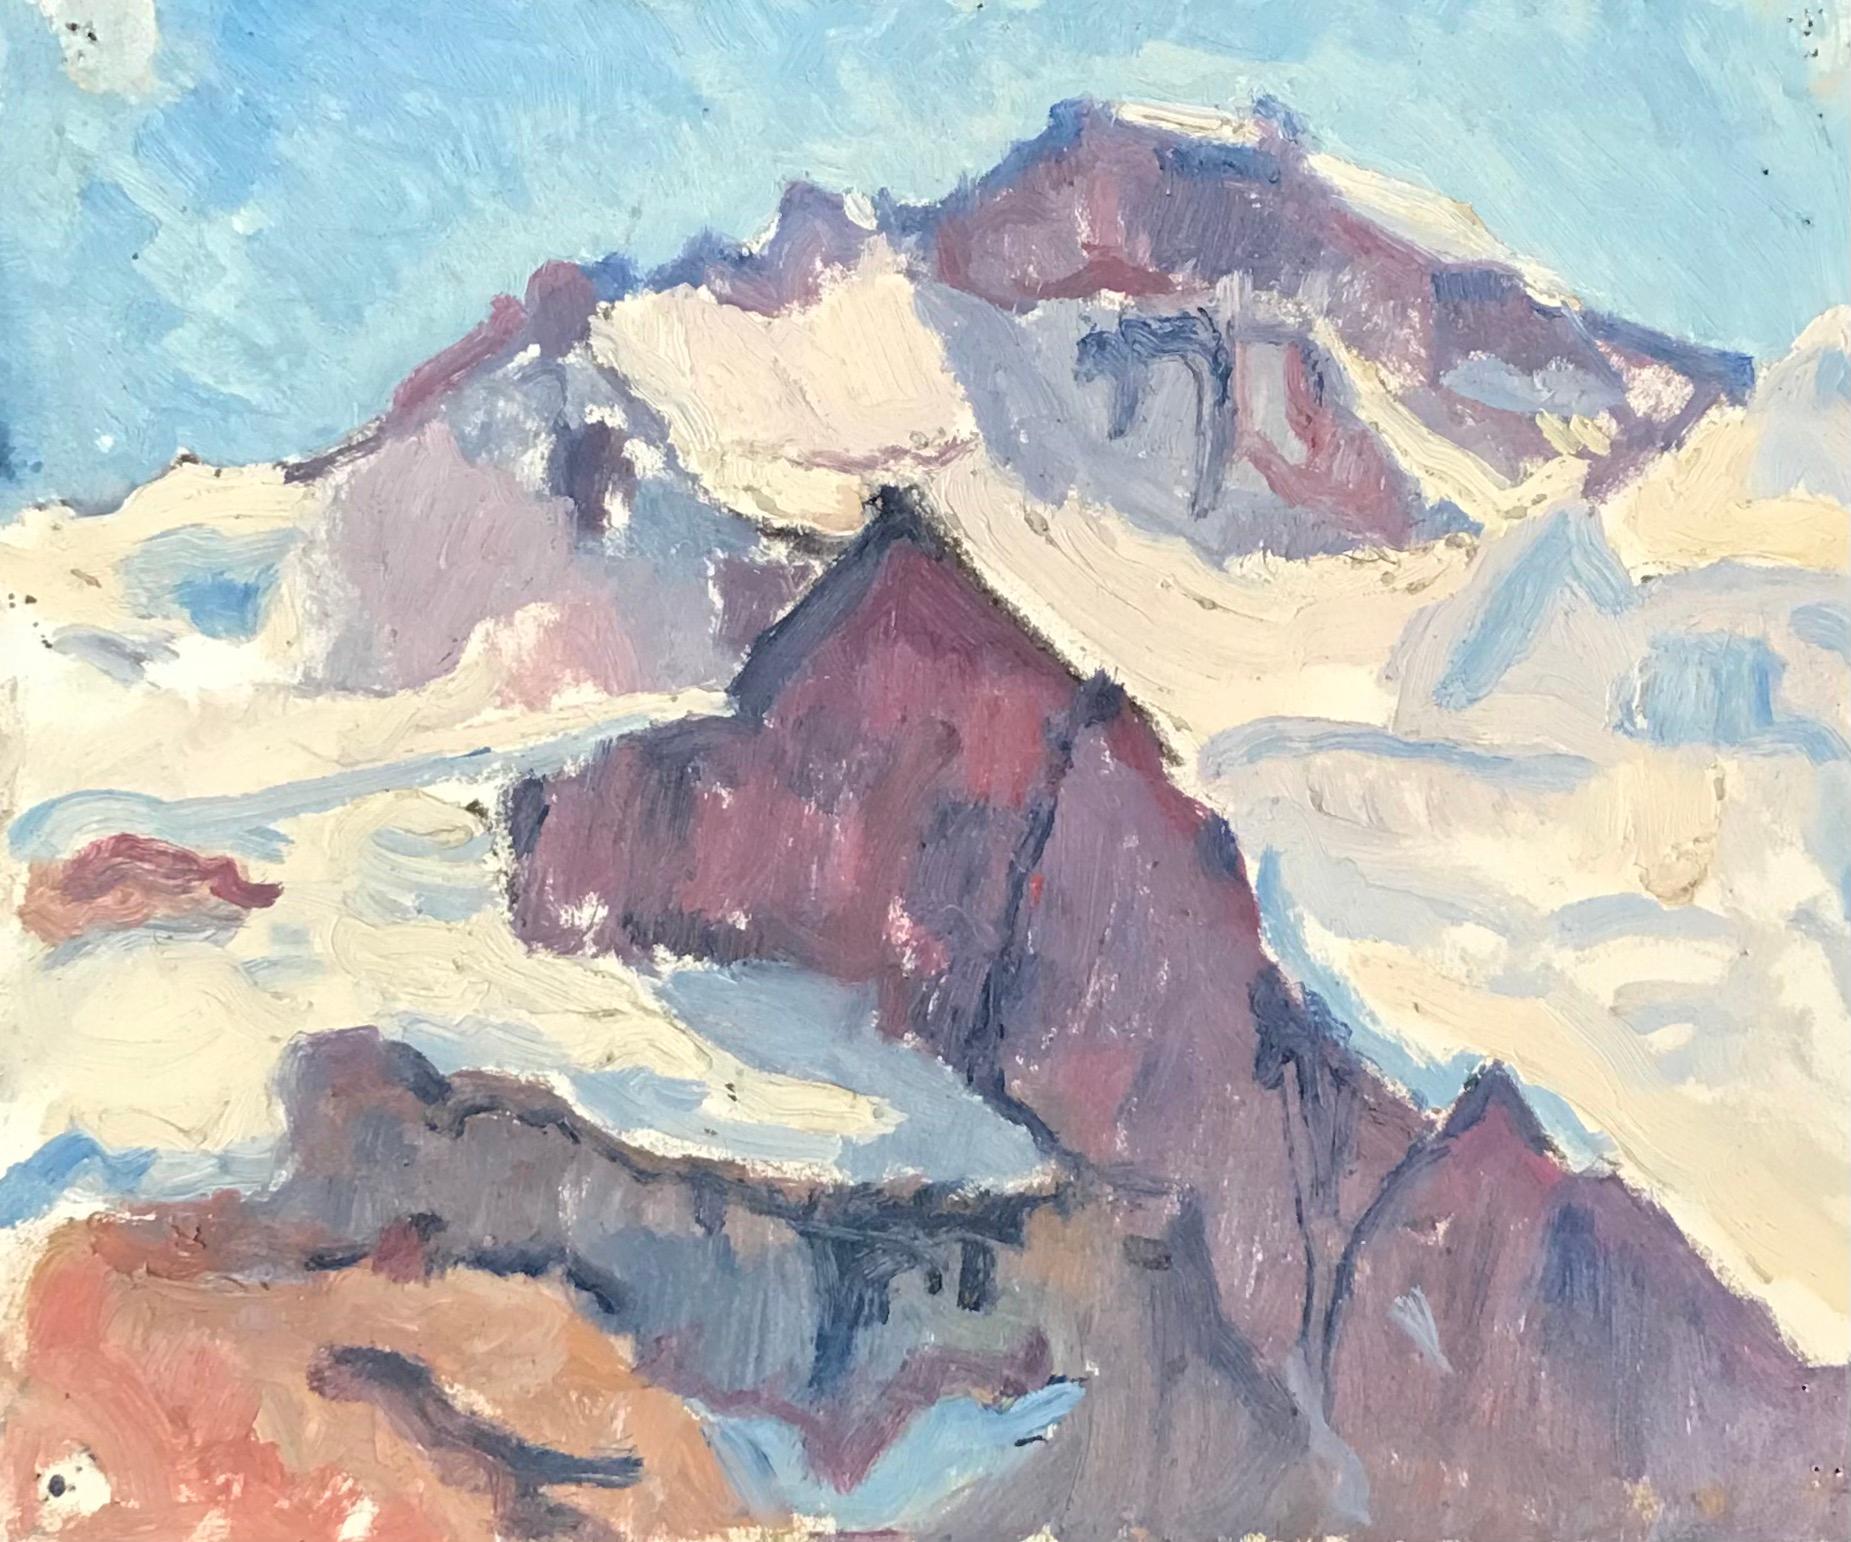 Isaac Charles Goetz Landscape Painting - Snowy mountain by I. Ch. Goetz - Watercolor on paper 18x22 cm